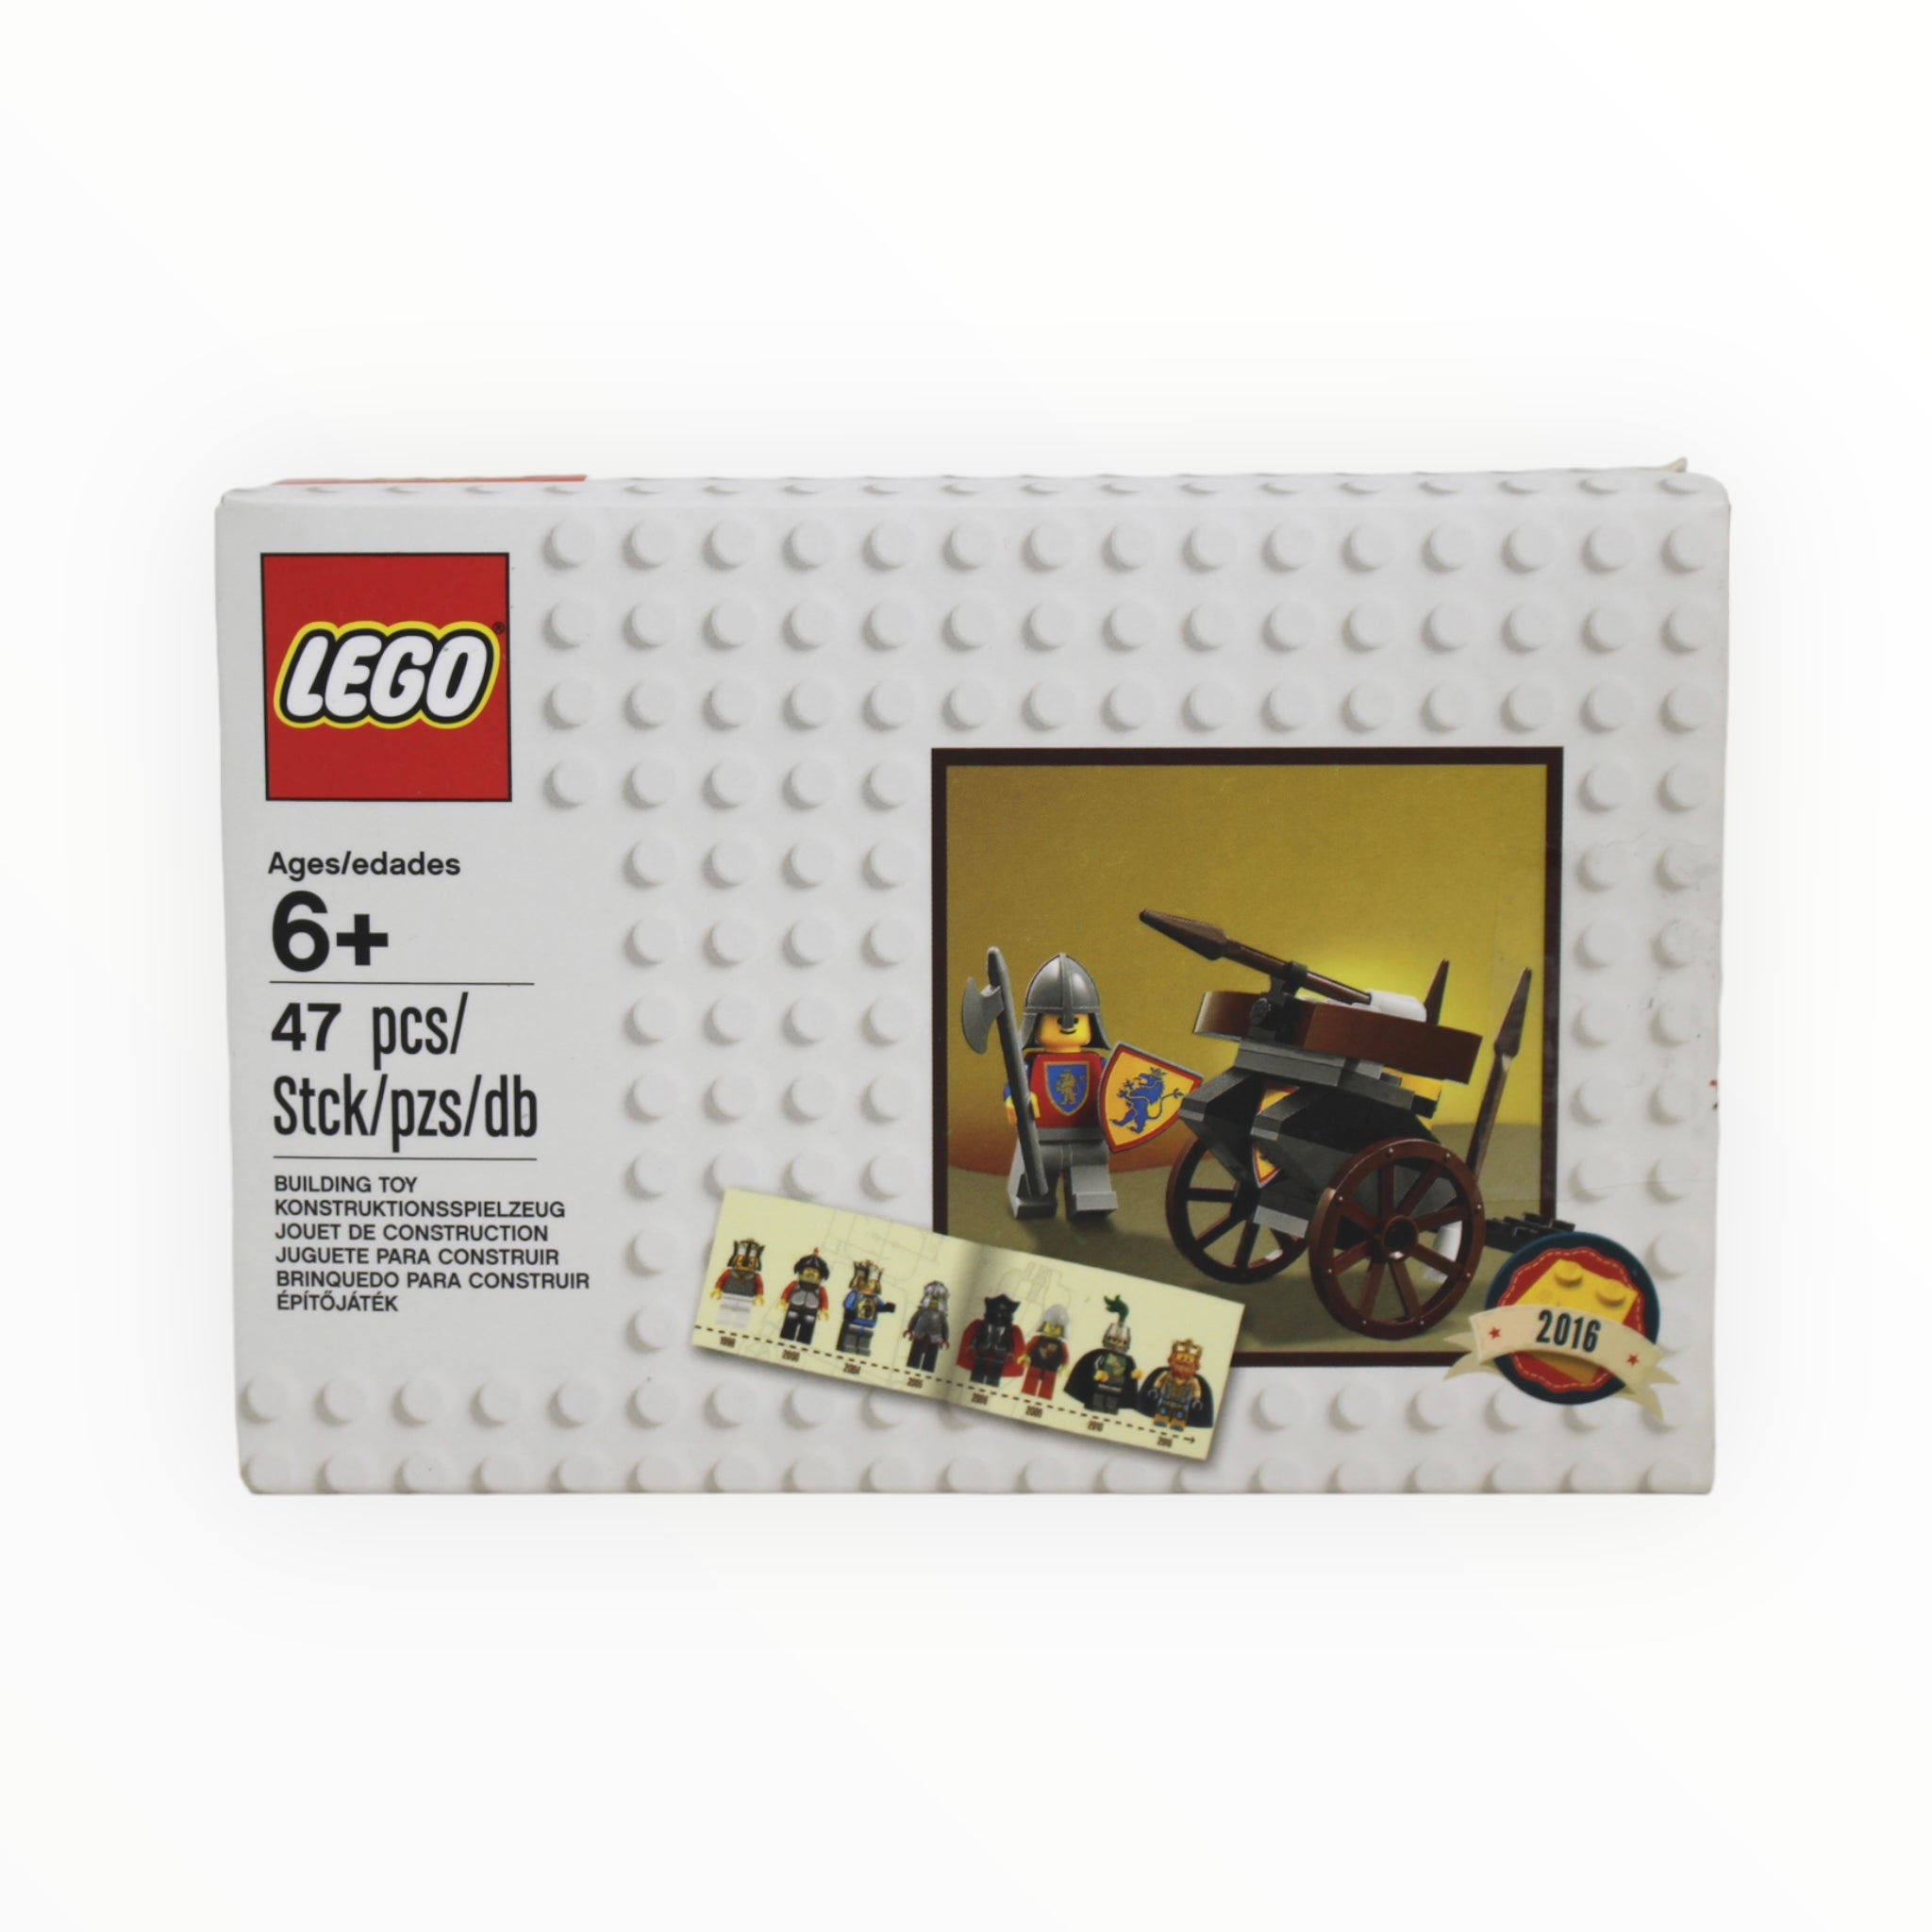 Certified Used Set 5004419 Classic Knights Minifigure (open box, sealed bag)